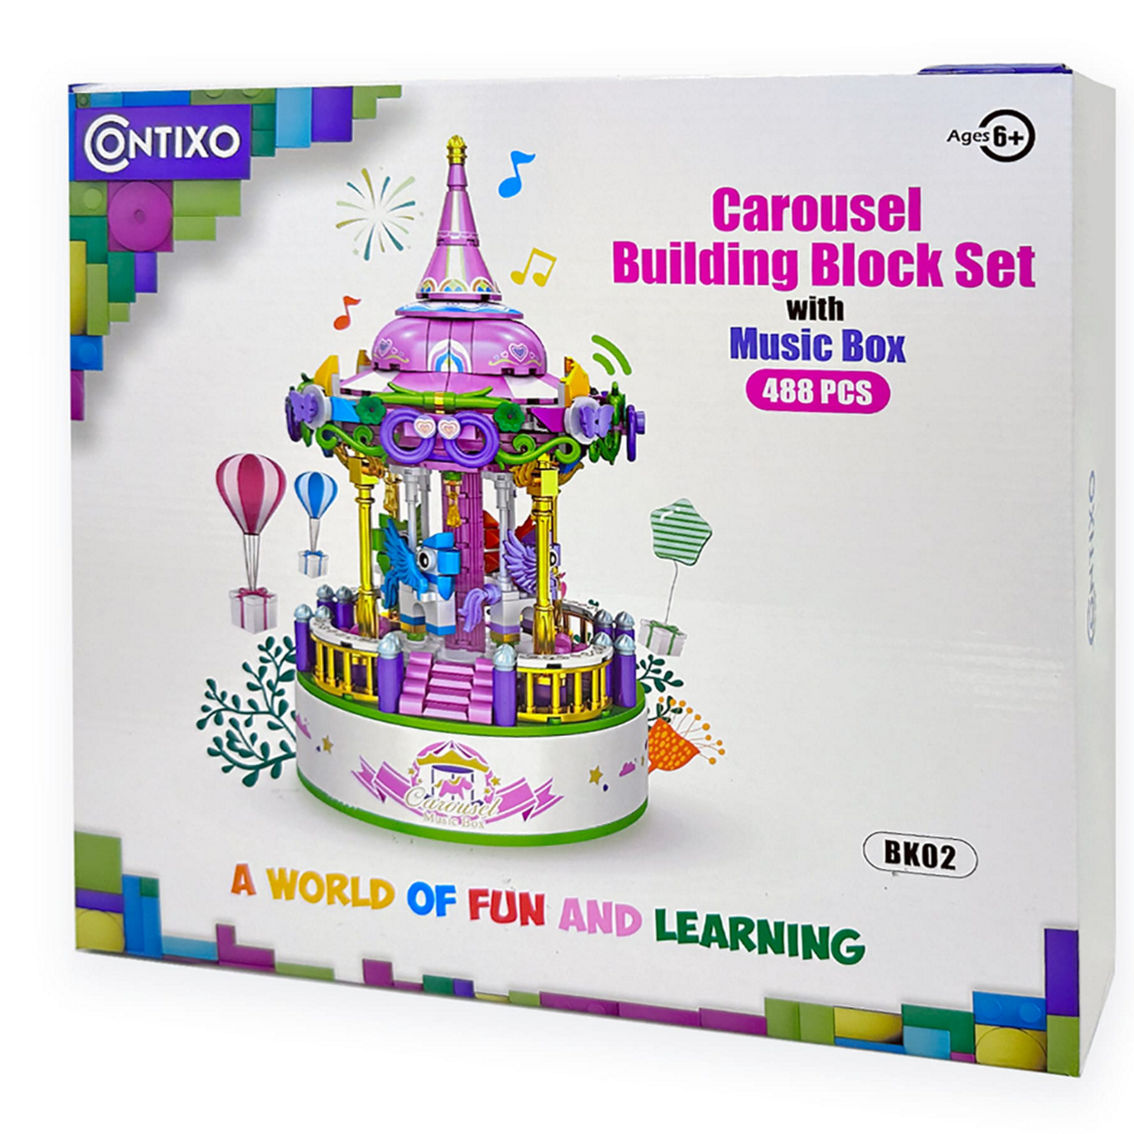 Contixo BK02 Carousel Building Block Set with Music Box, 488 Pieces - Image 2 of 5